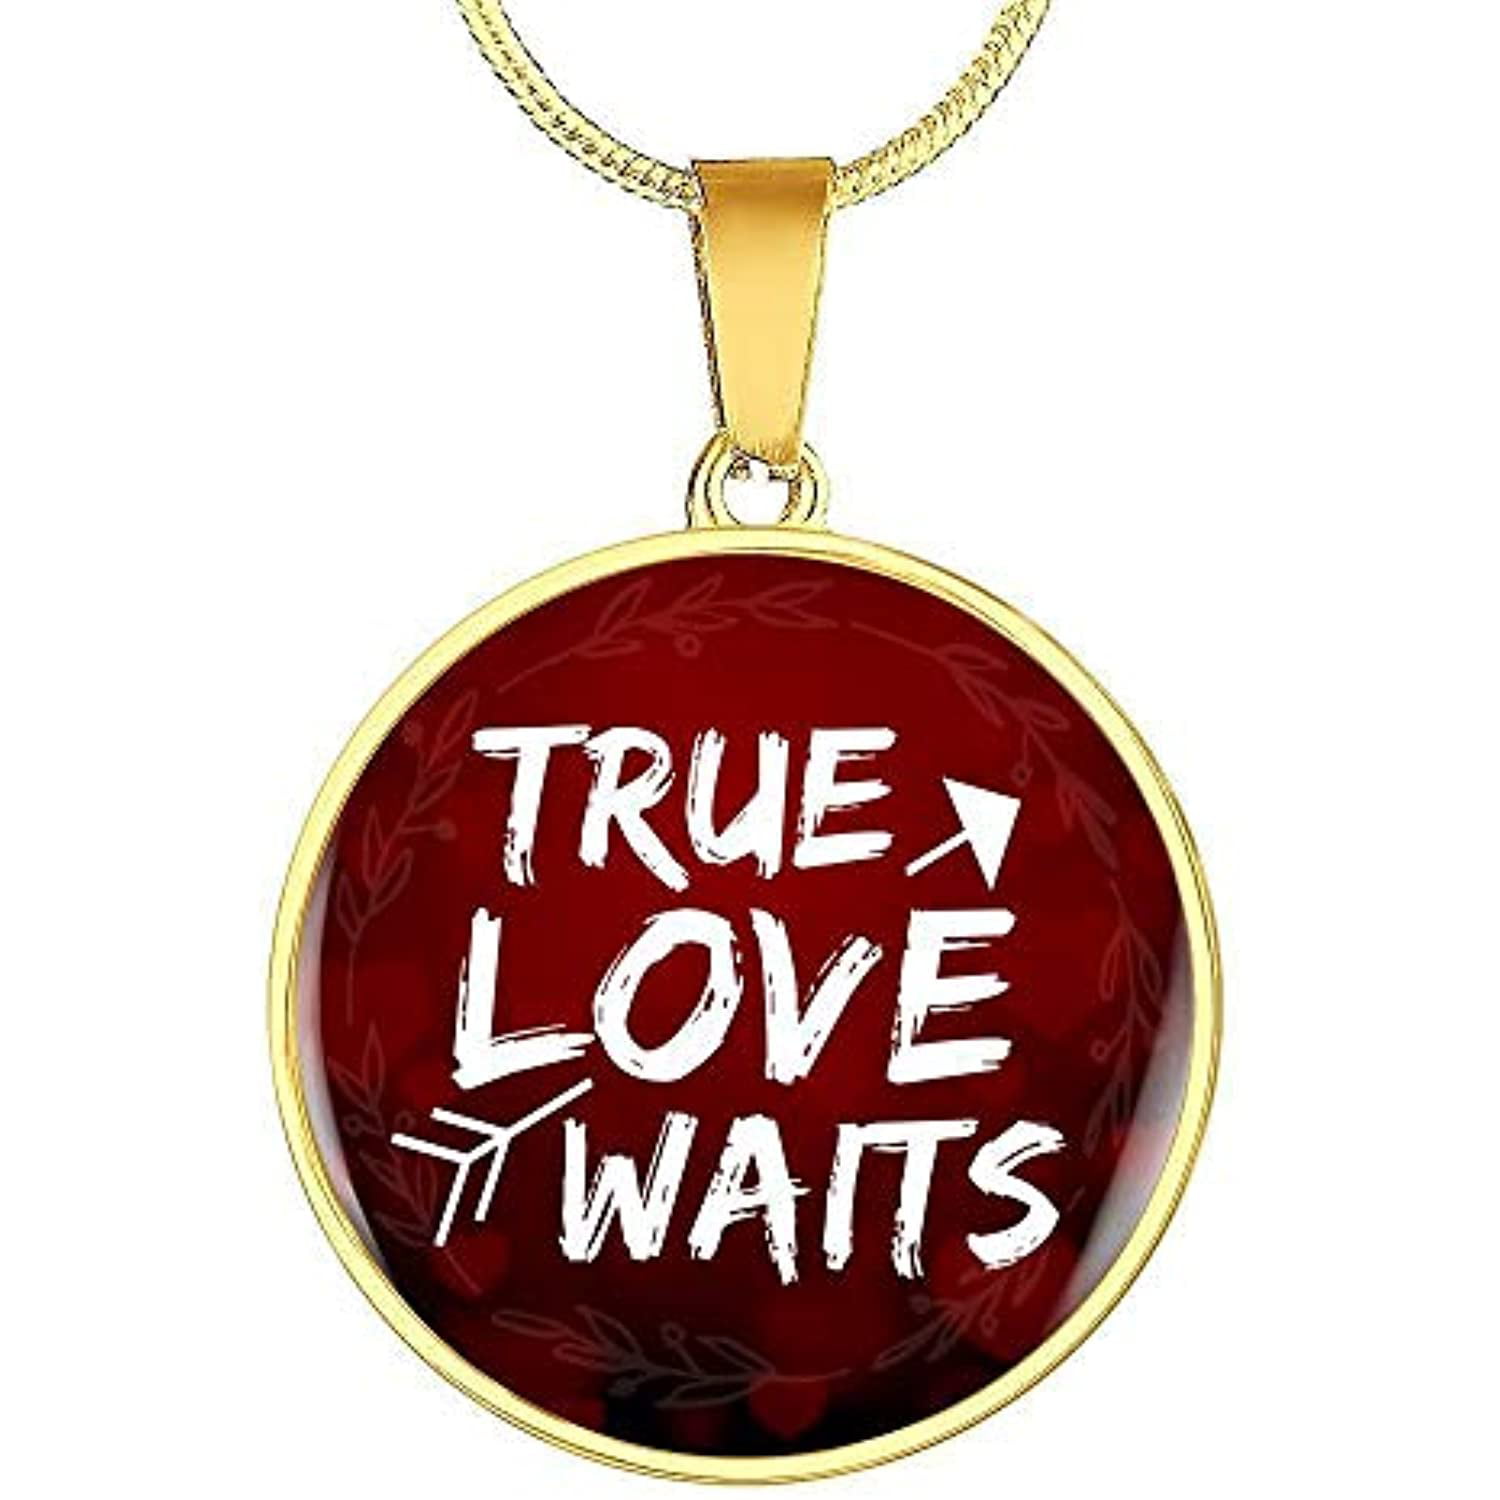 Express Your Love Gifts Great Thing Dont Wait Circle Pendant Necklace Stainless Steel or 18k Gold 18-22 